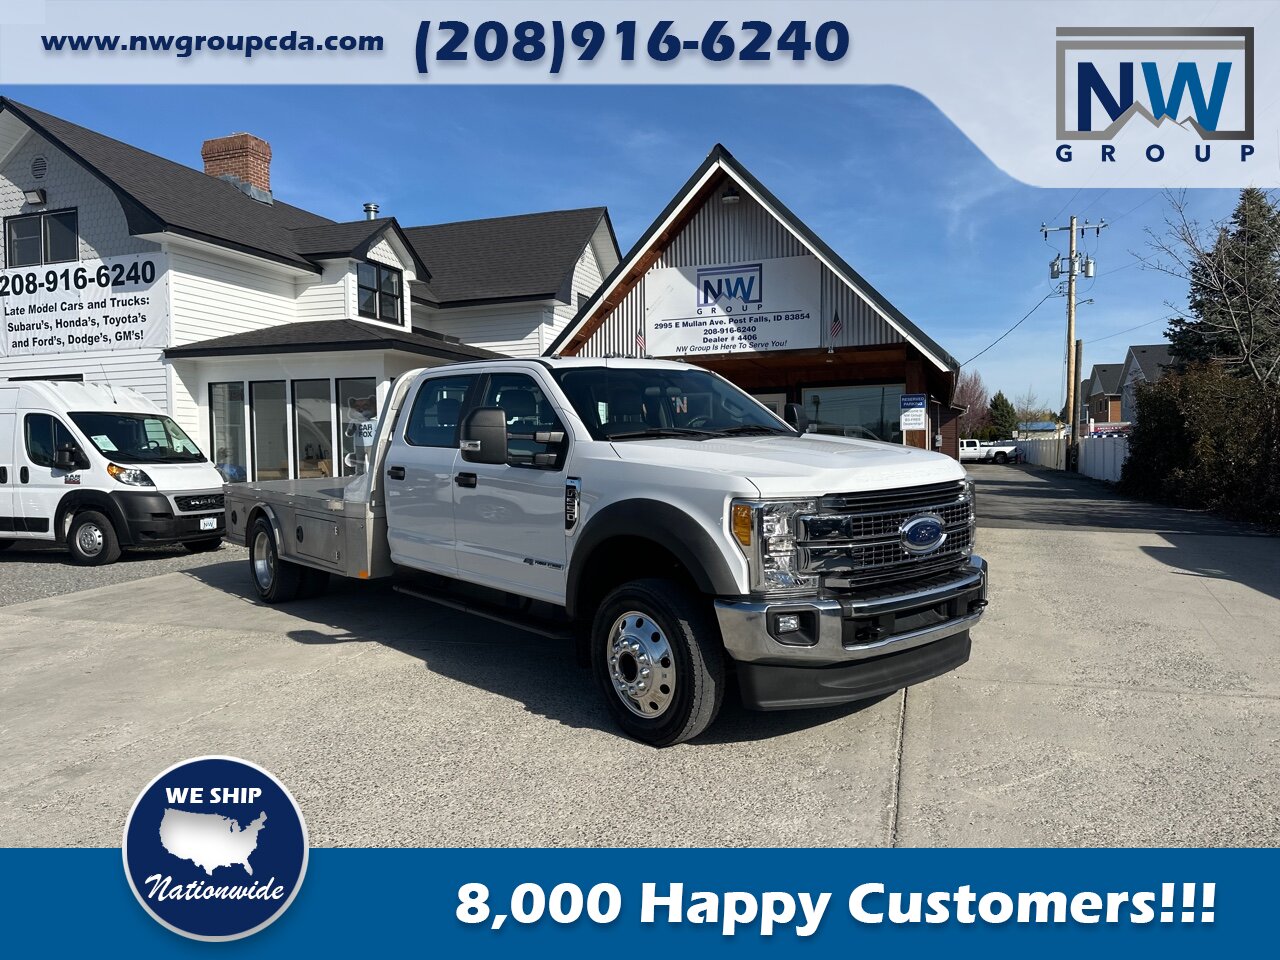 2020 Ford Commercial F-550 Super Duty XL Cab & Chassis  11.5' CM Truck Beds Aluminum Flat Bed! Heavy Duty Pick Up! Amazing Build, Only 31k miles! - Photo 2 - Post Falls, ID 83854